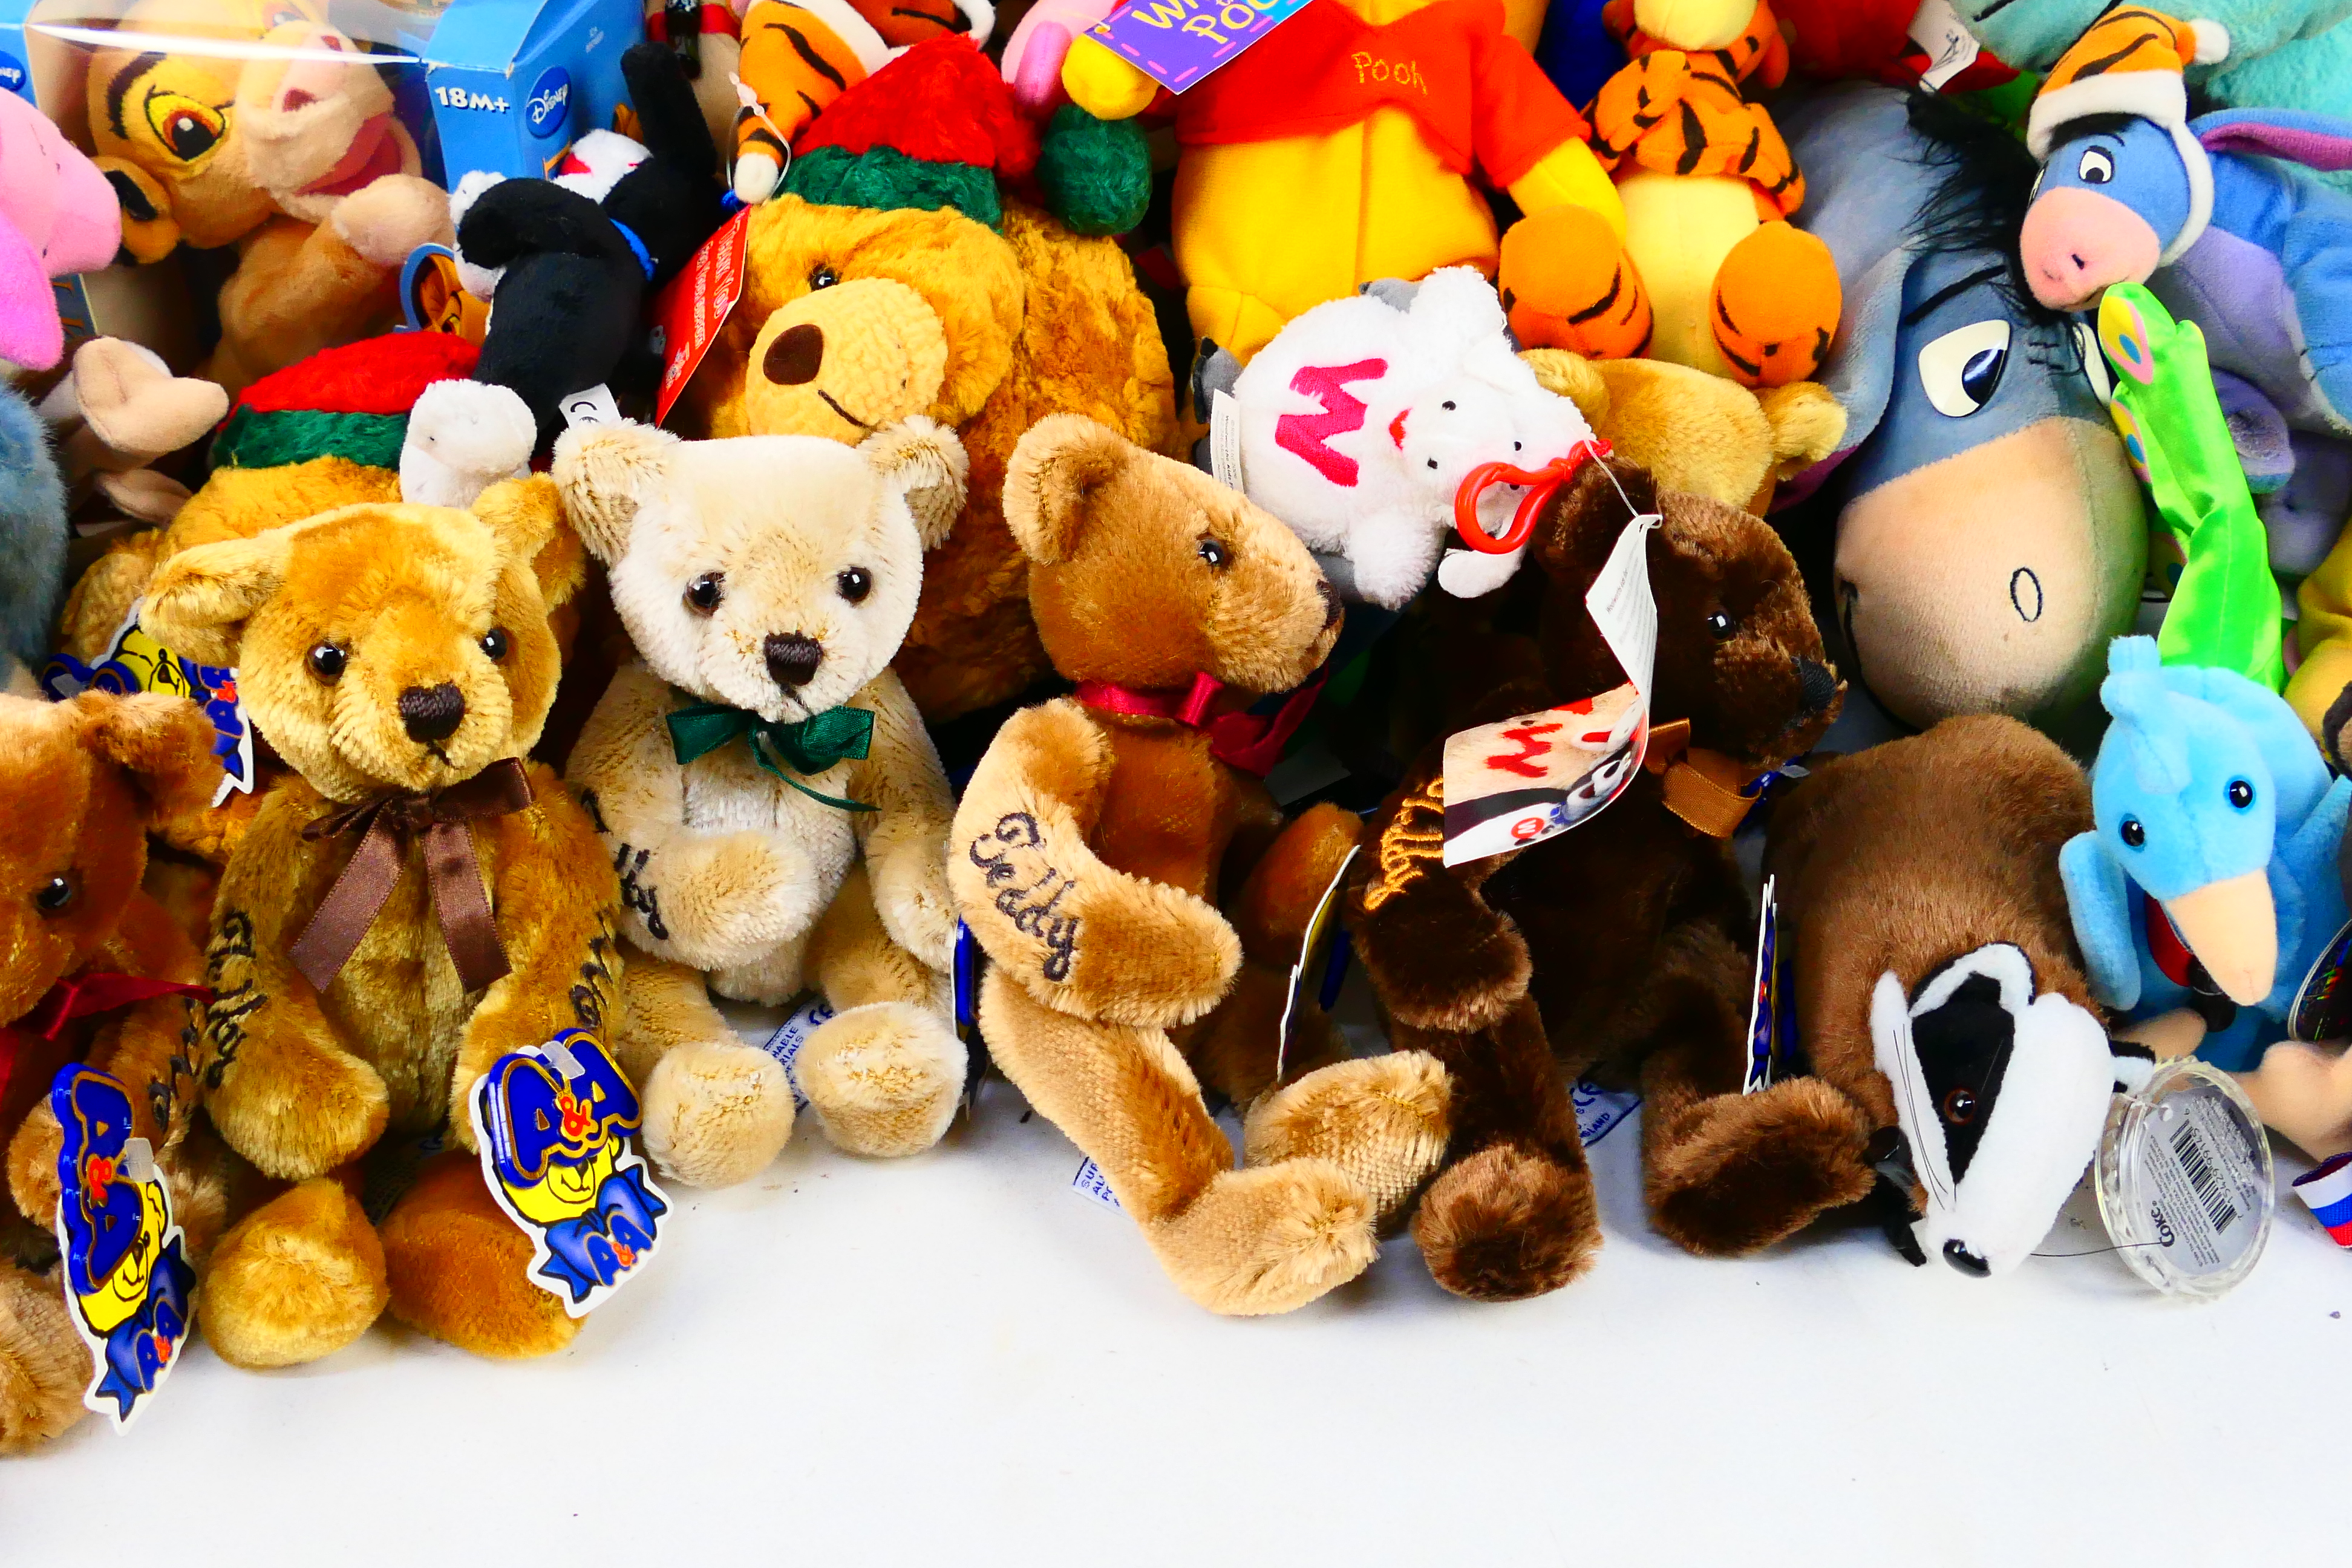 Coke Cola - Disney - A collection of soft toys including a collection of Coke Cola Bean Bag animals, - Image 3 of 7